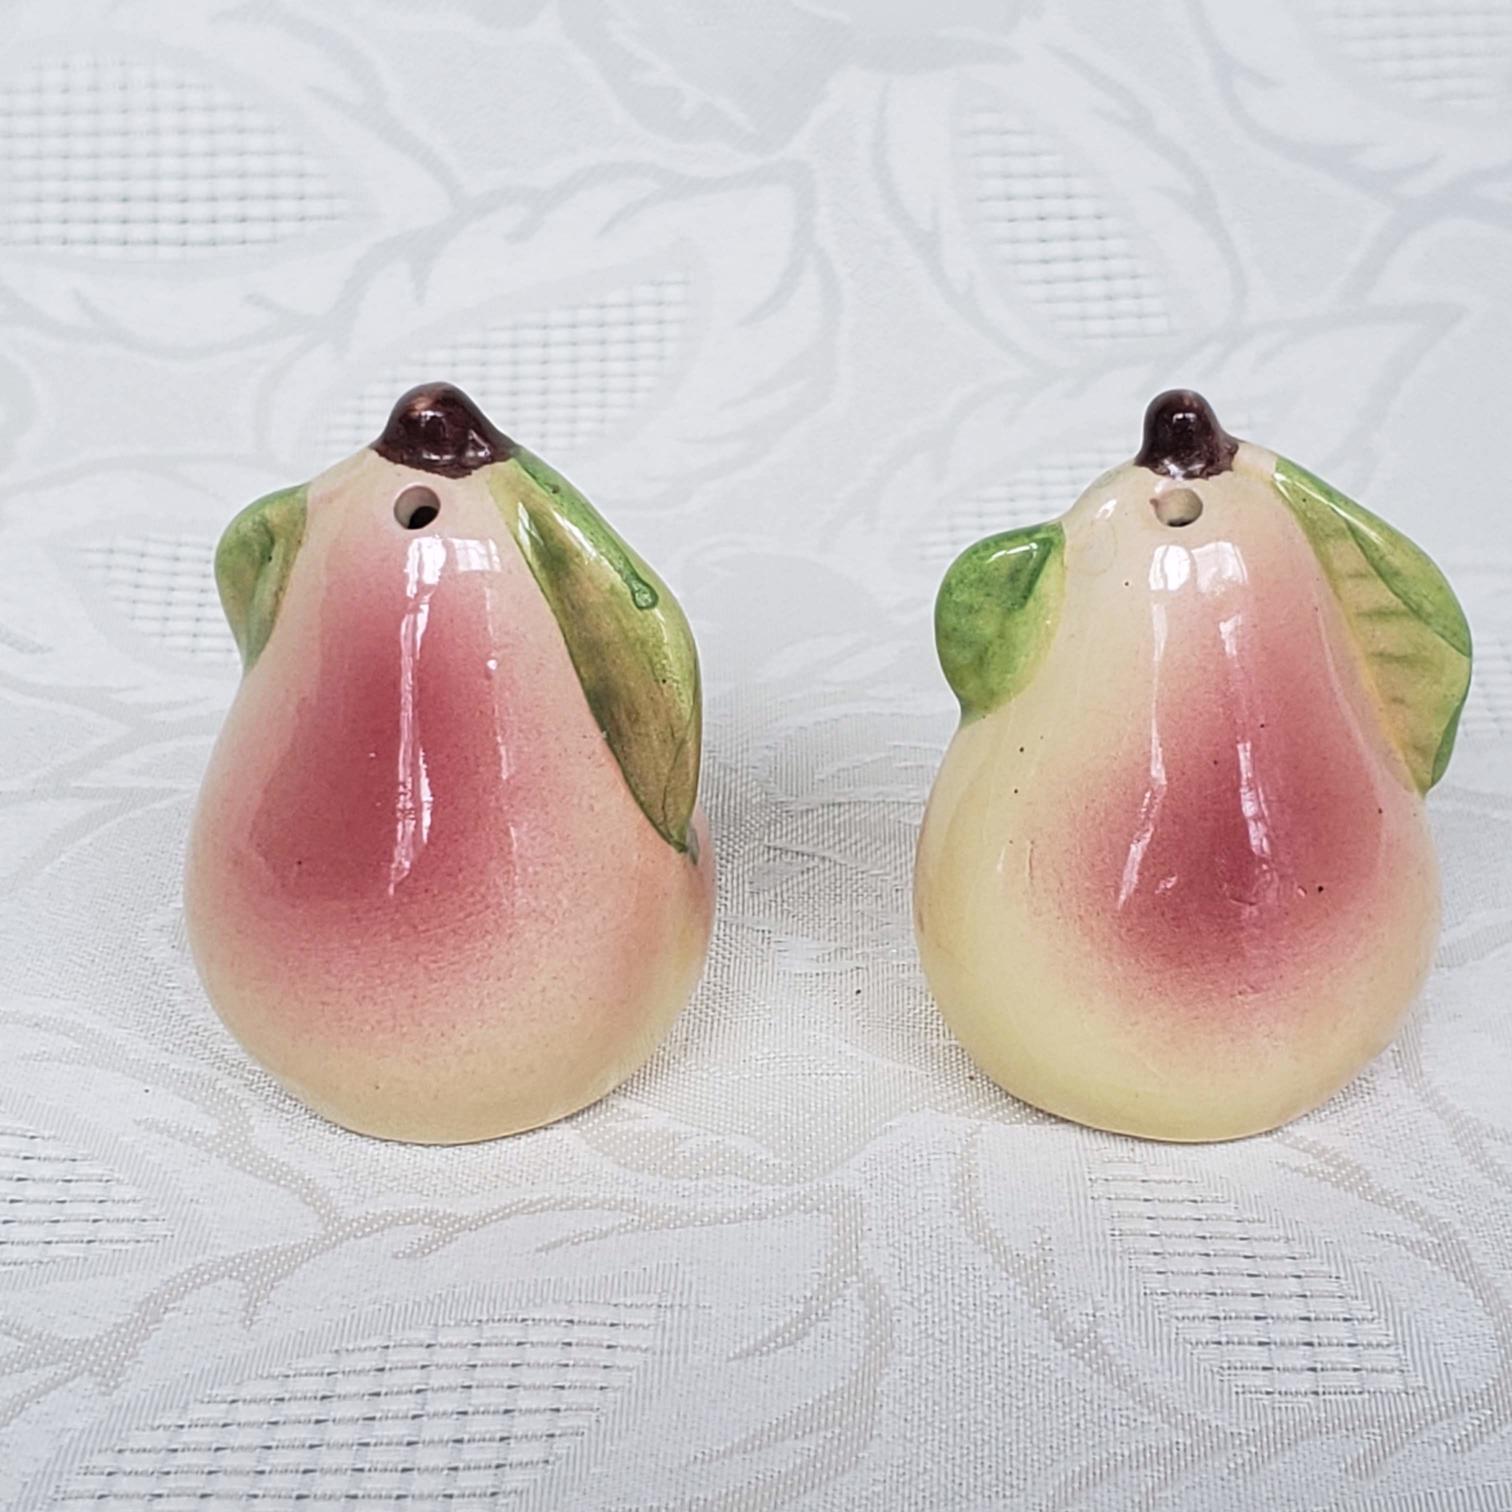 https://serstyle.com/wp-content/uploads/2020/01/Pear-Salt-and-Pepper-Shakers-with-Caddy-10.jpg